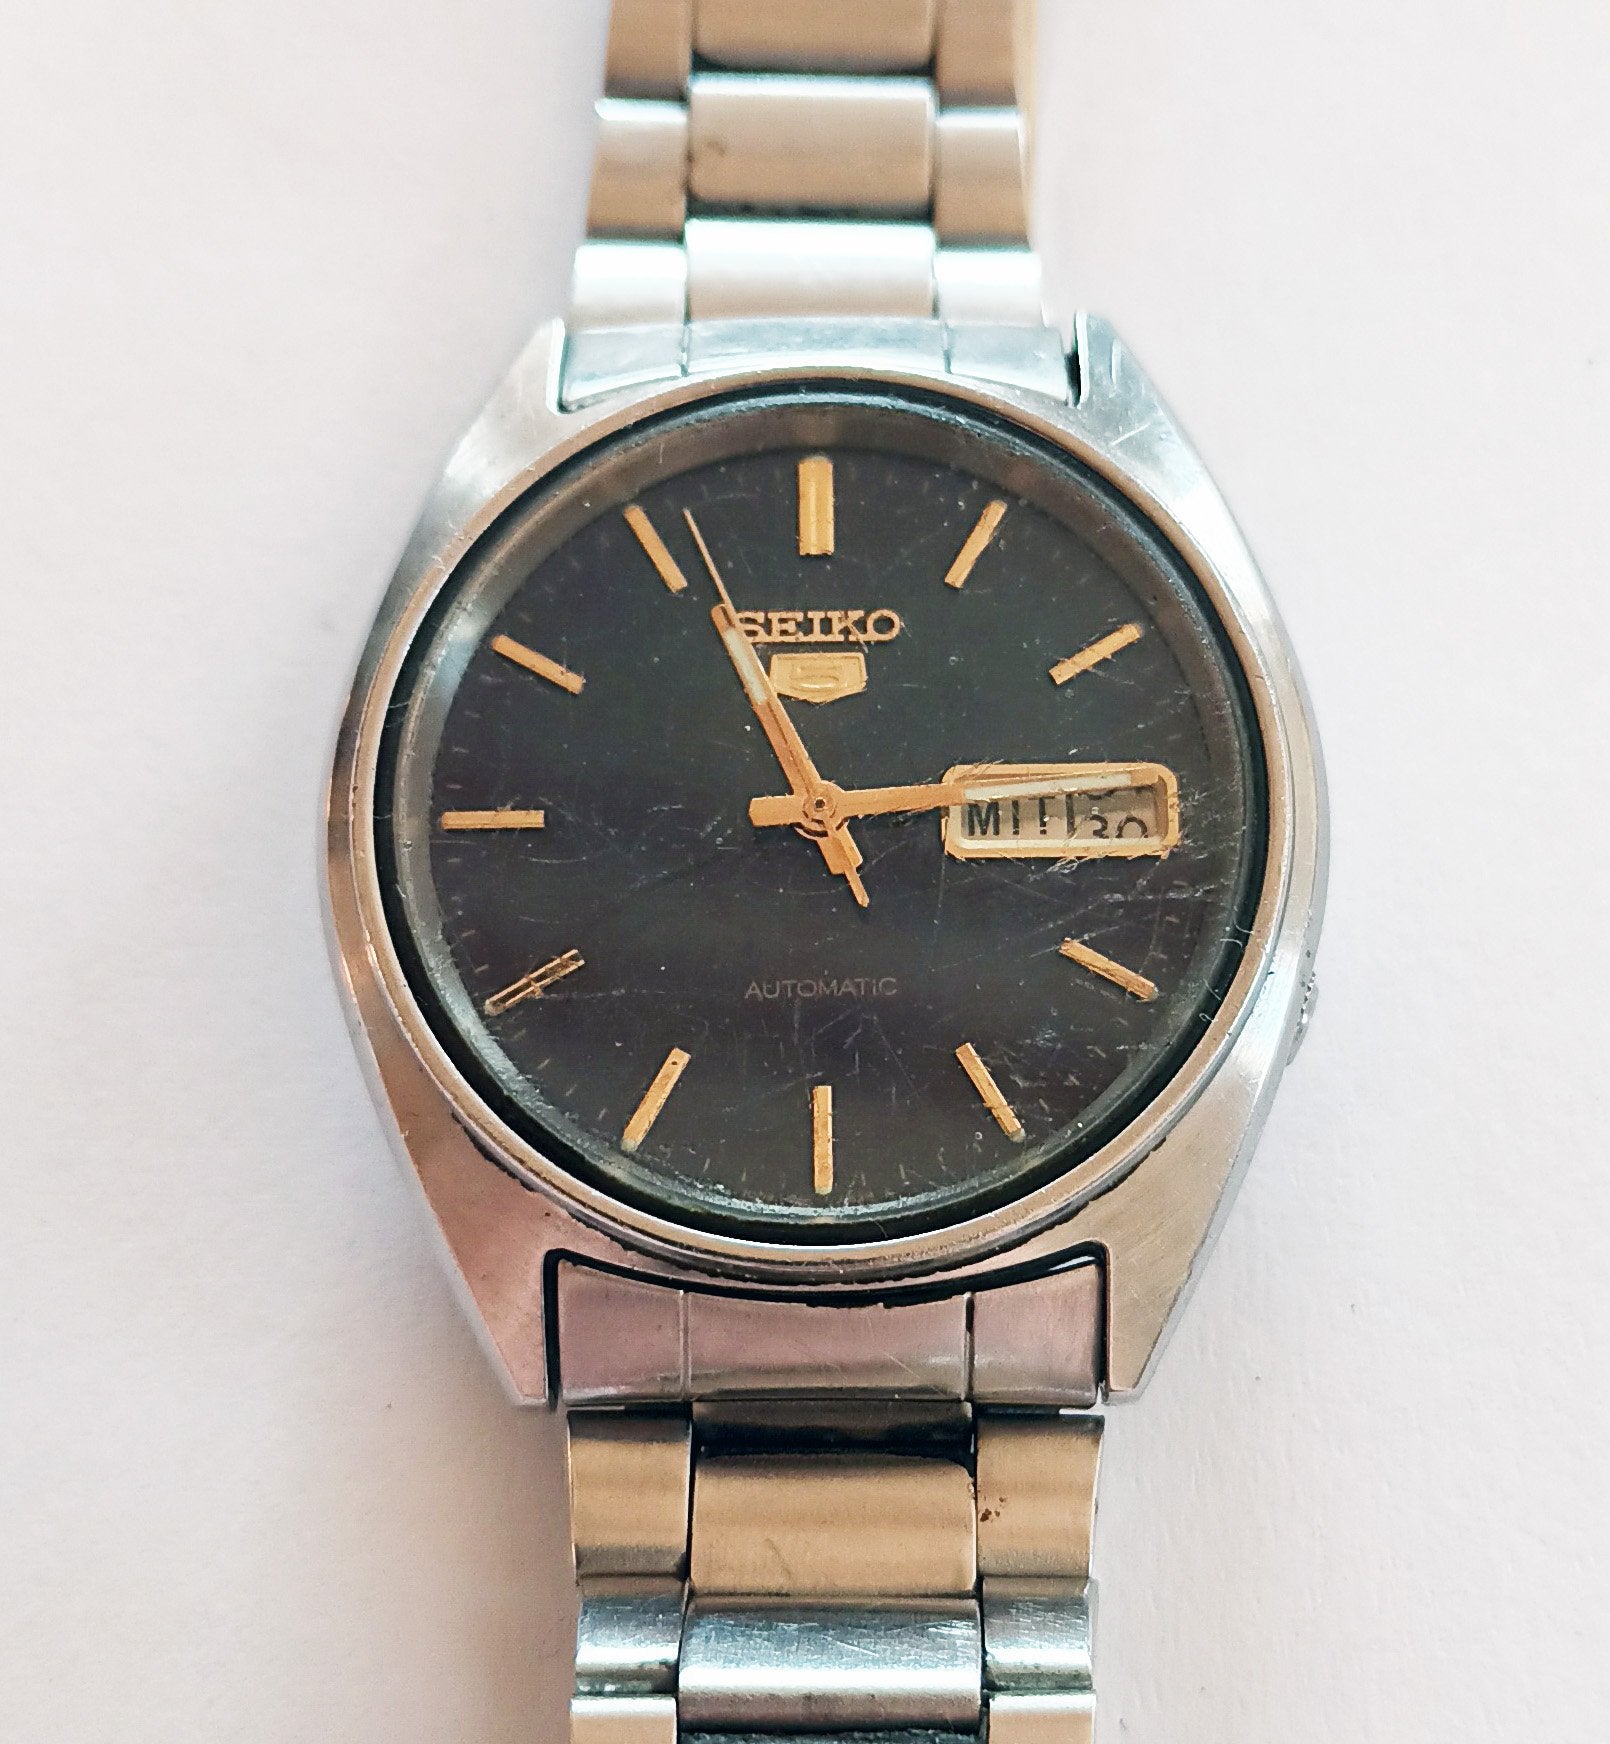 Old Seiko 5 - is it worth servicing? | WatchUSeek Watch Forums